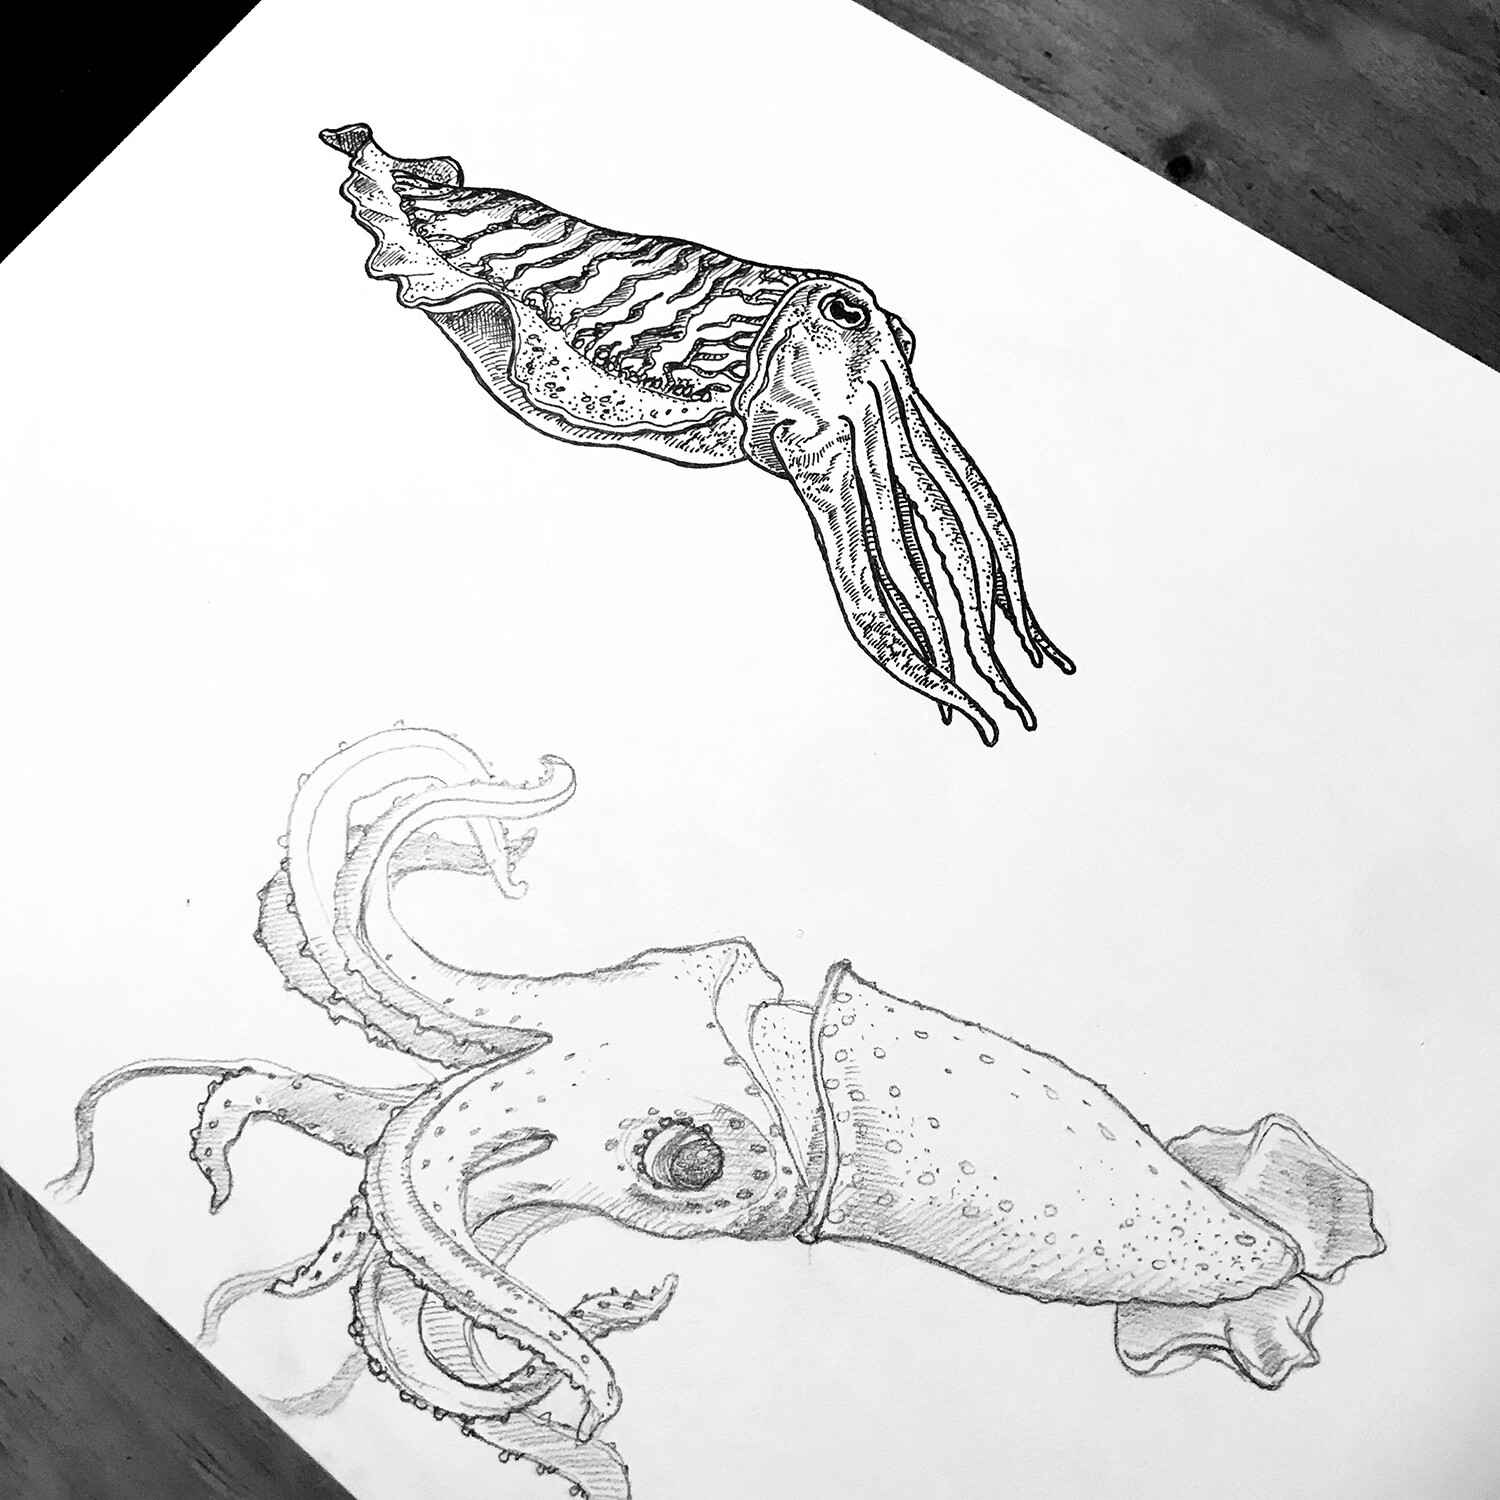 Soft animal - Squid and Cuttlefish